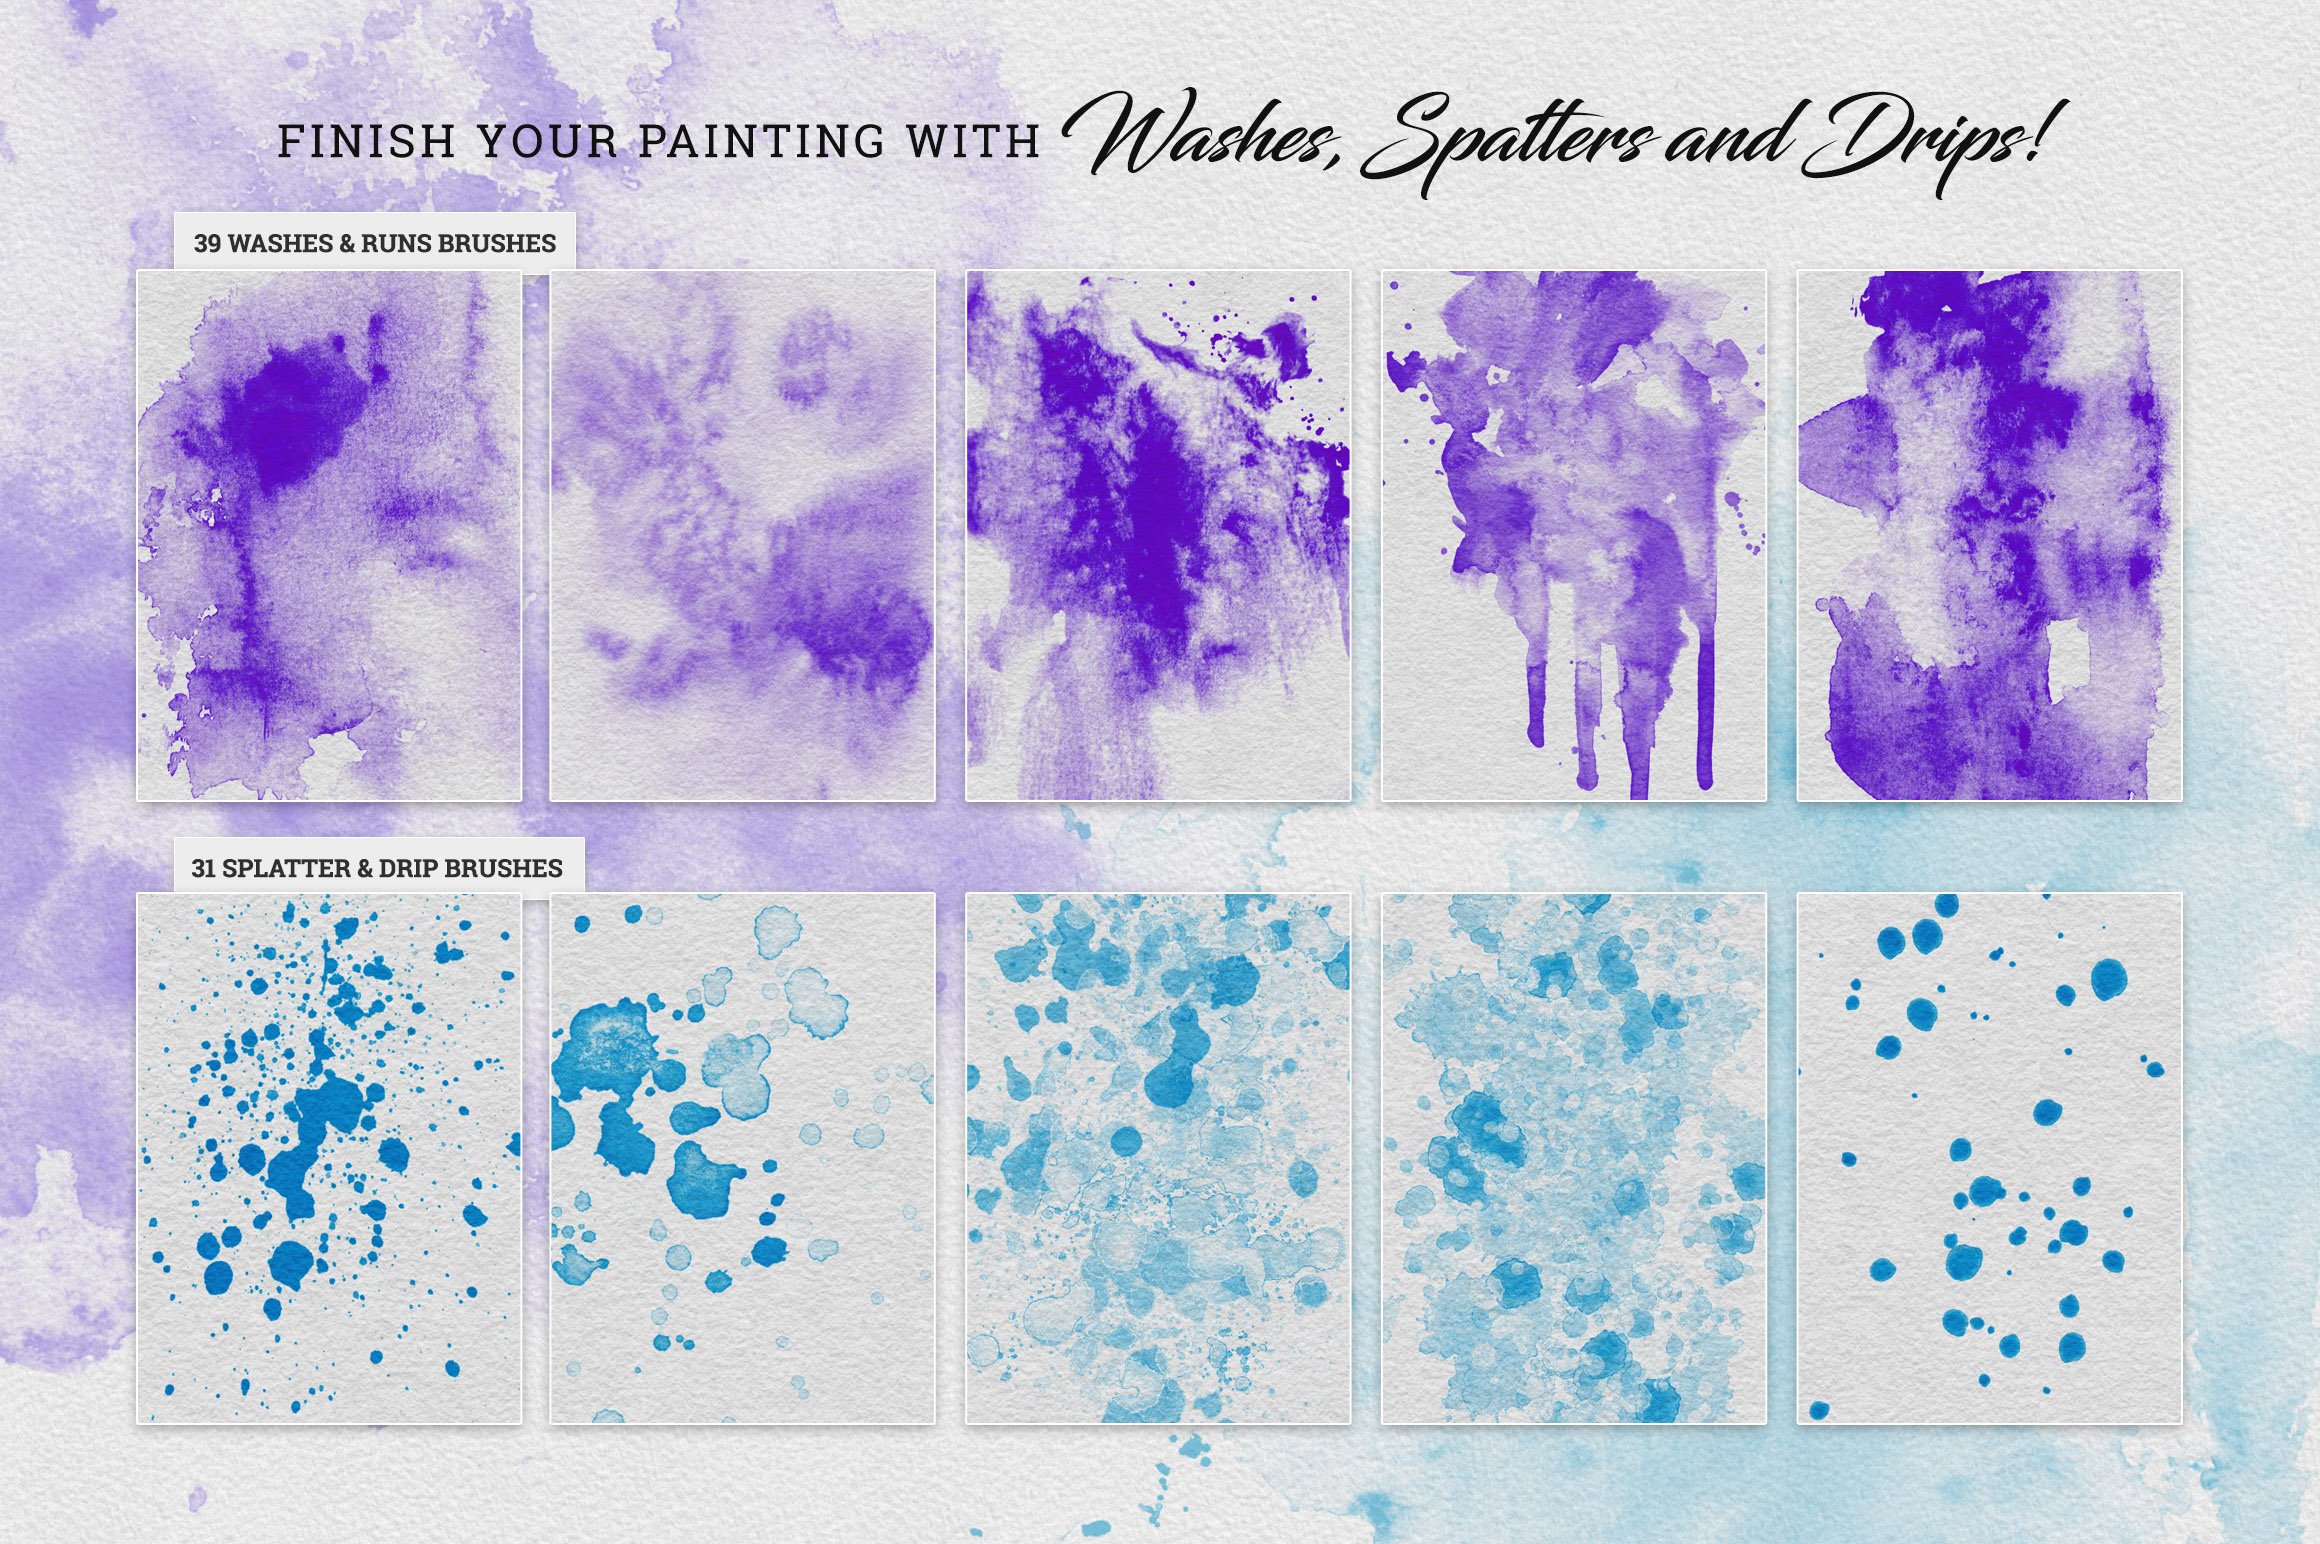 Finish your painting with washes, spatters and drips.